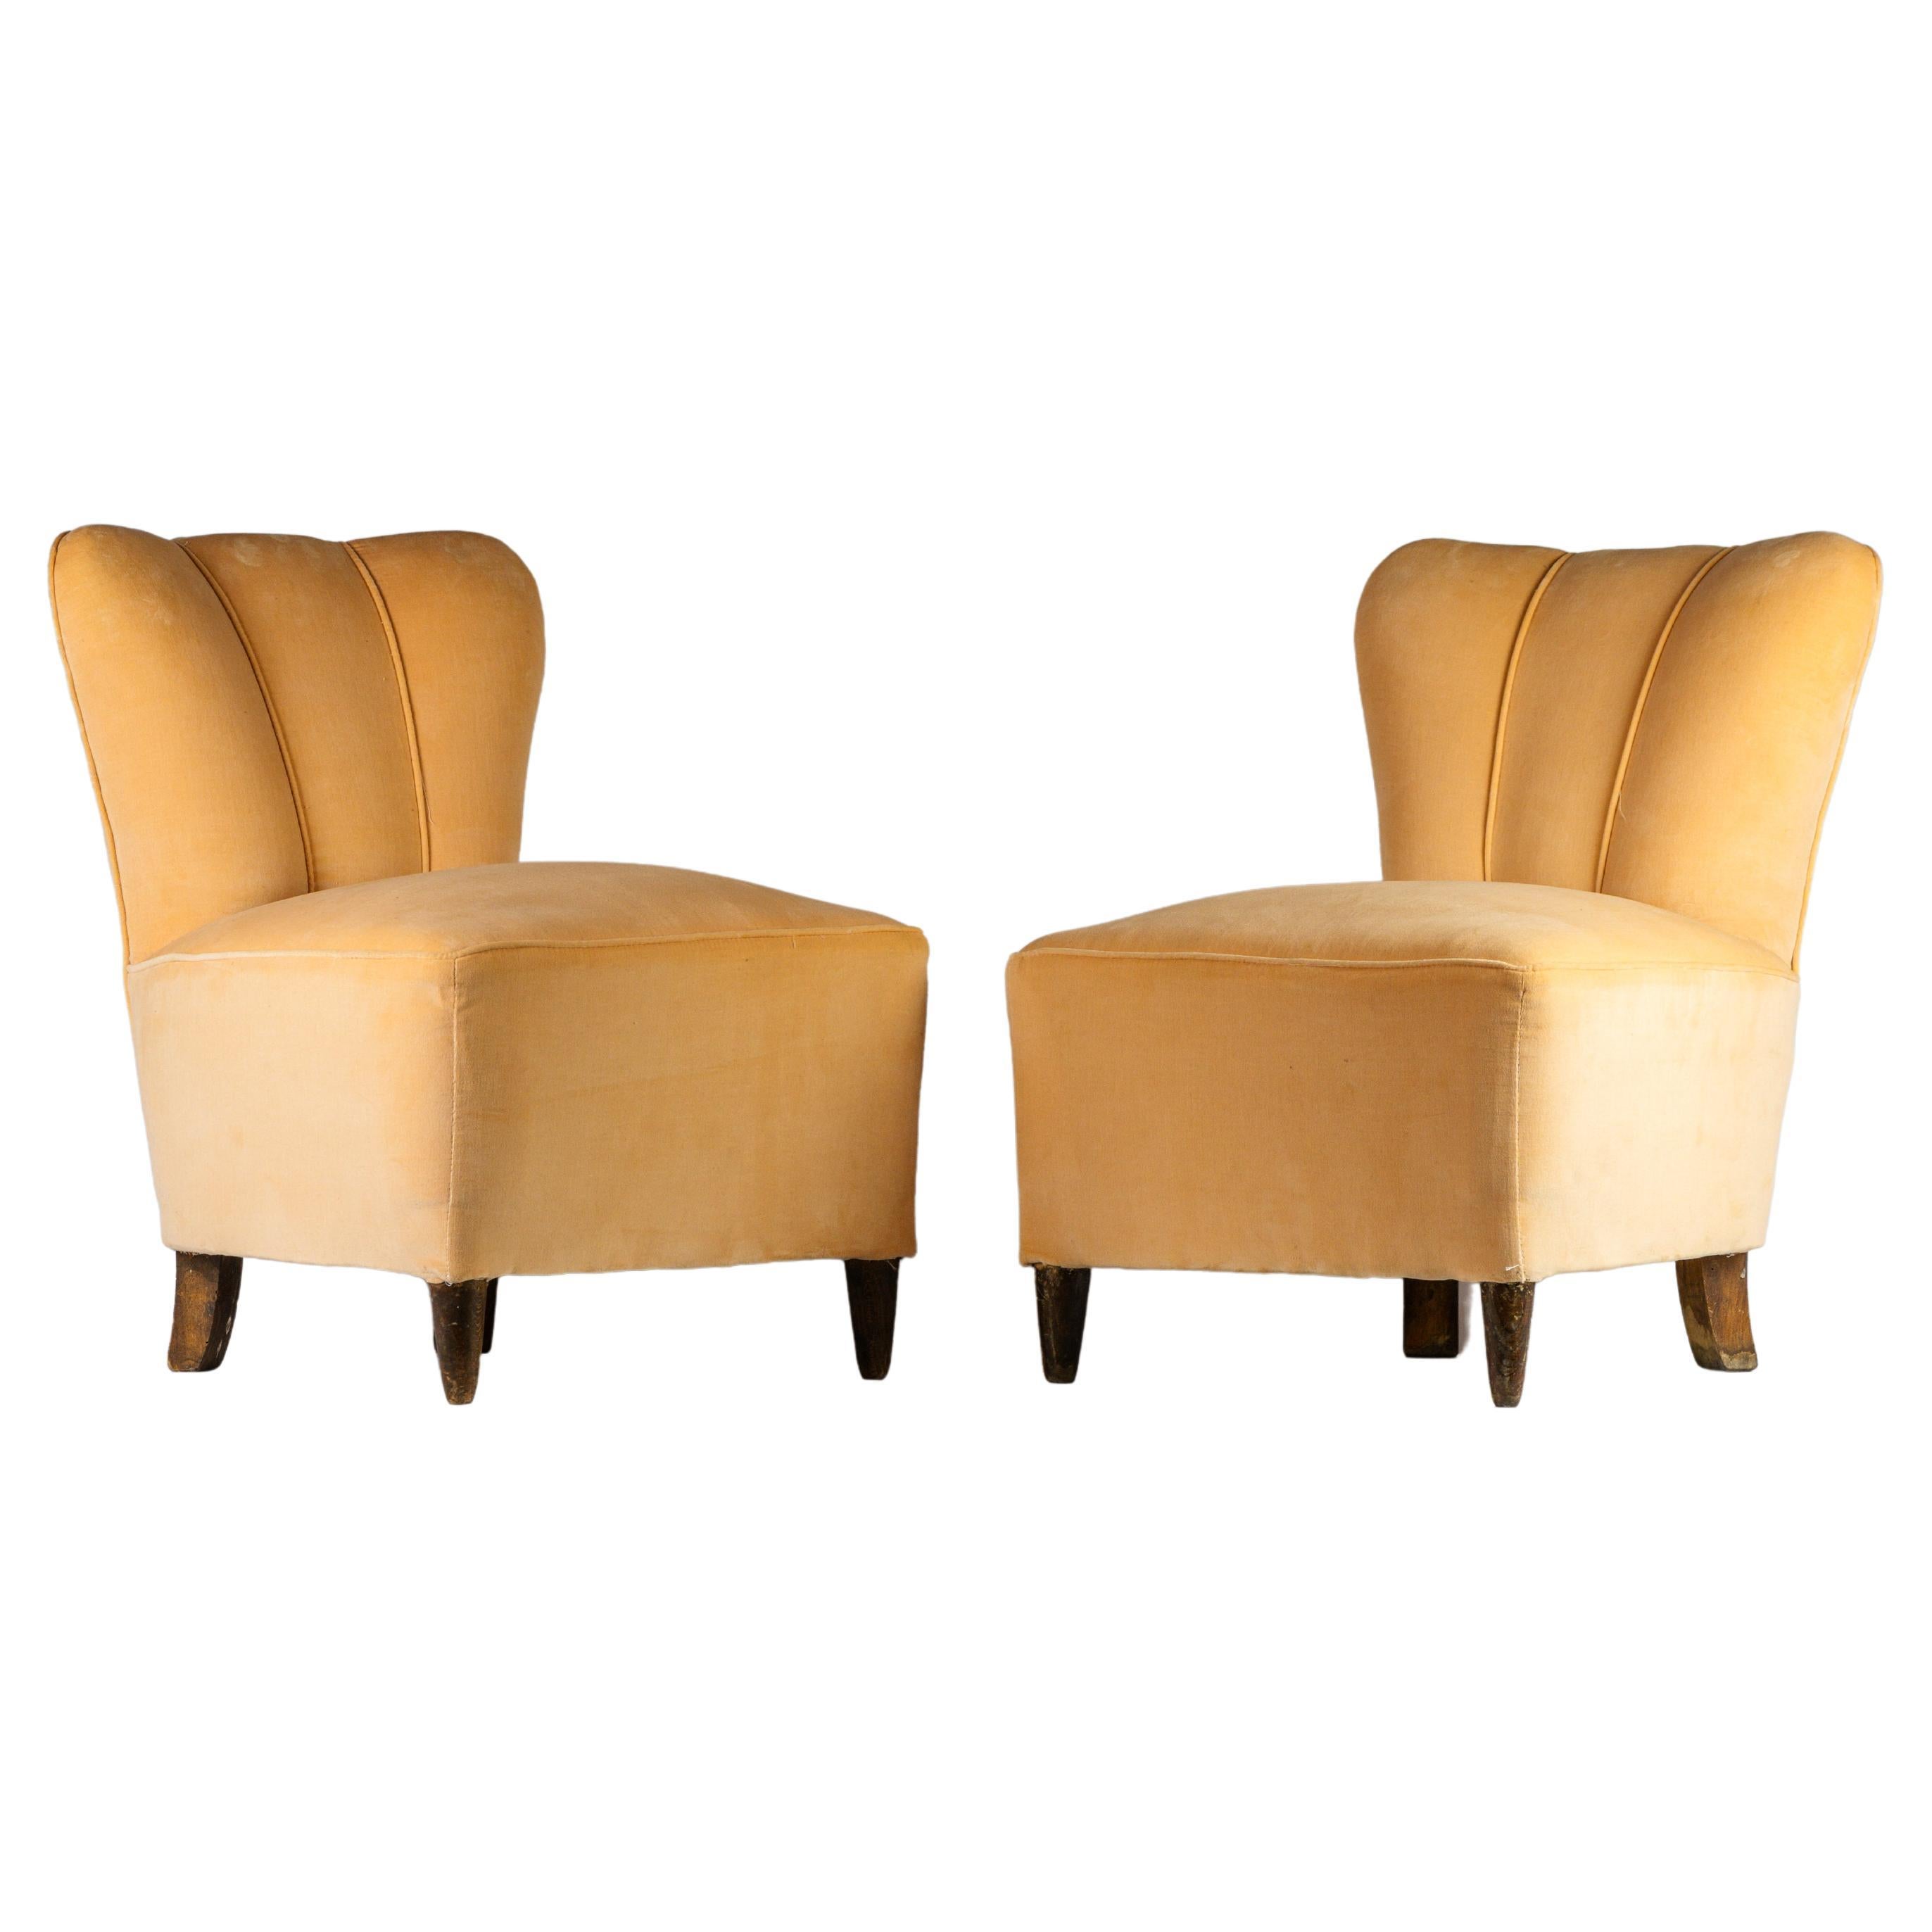 Pair of Gio Ponti light pink velvet and wooden feet armchairs